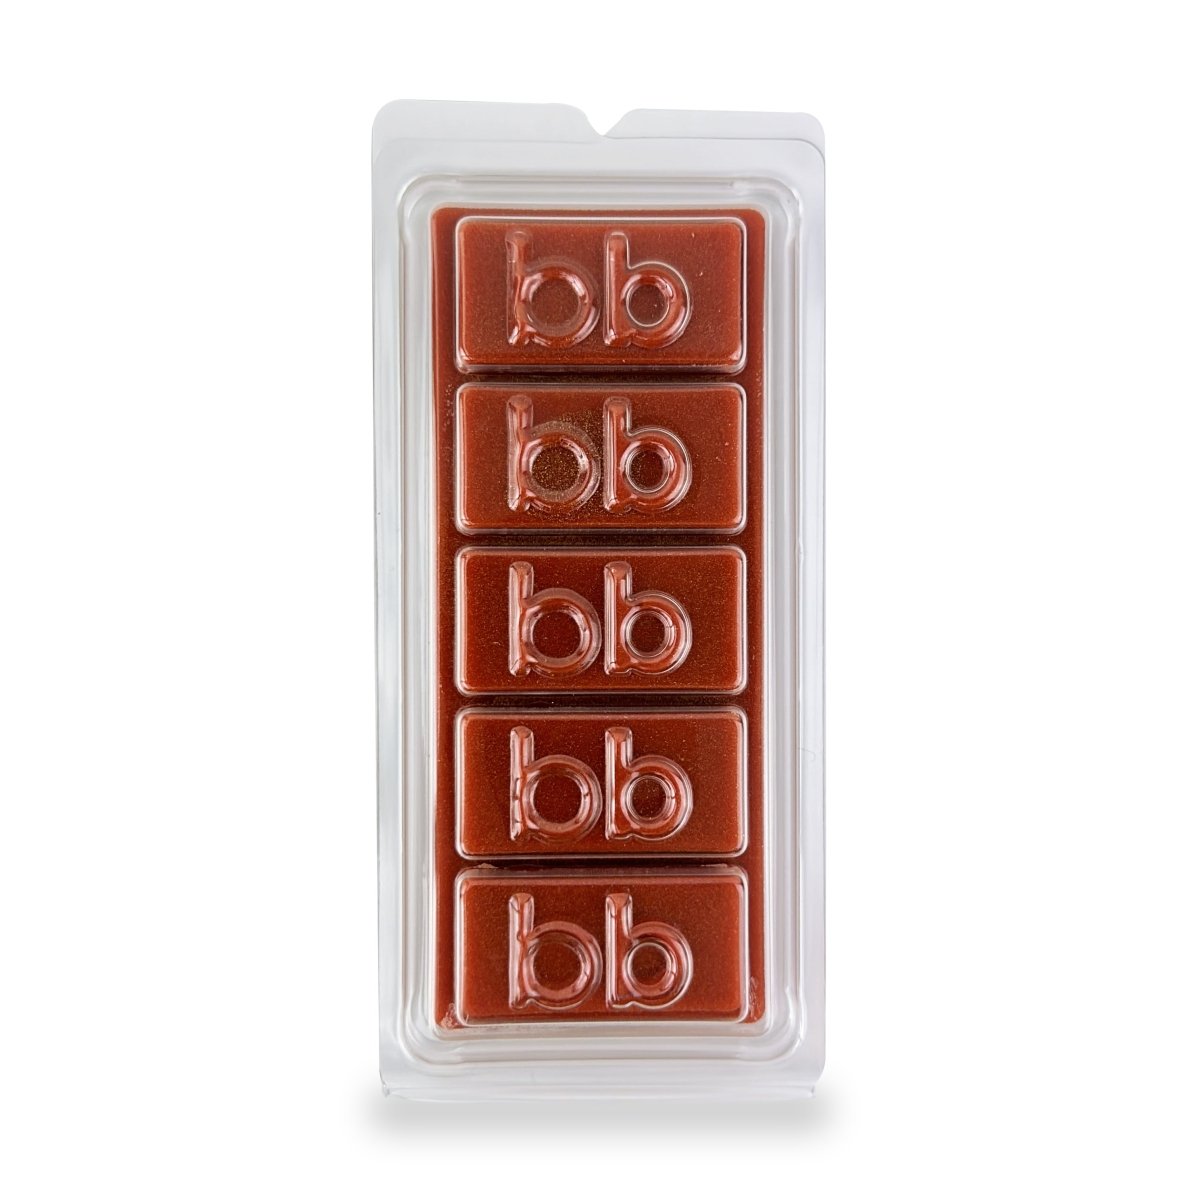 Fudge Brownie Natural Soy Wax Melts - Candle Alternative Aromatherapy & Strong Scent Fragrance Made in Australia by Bath Box